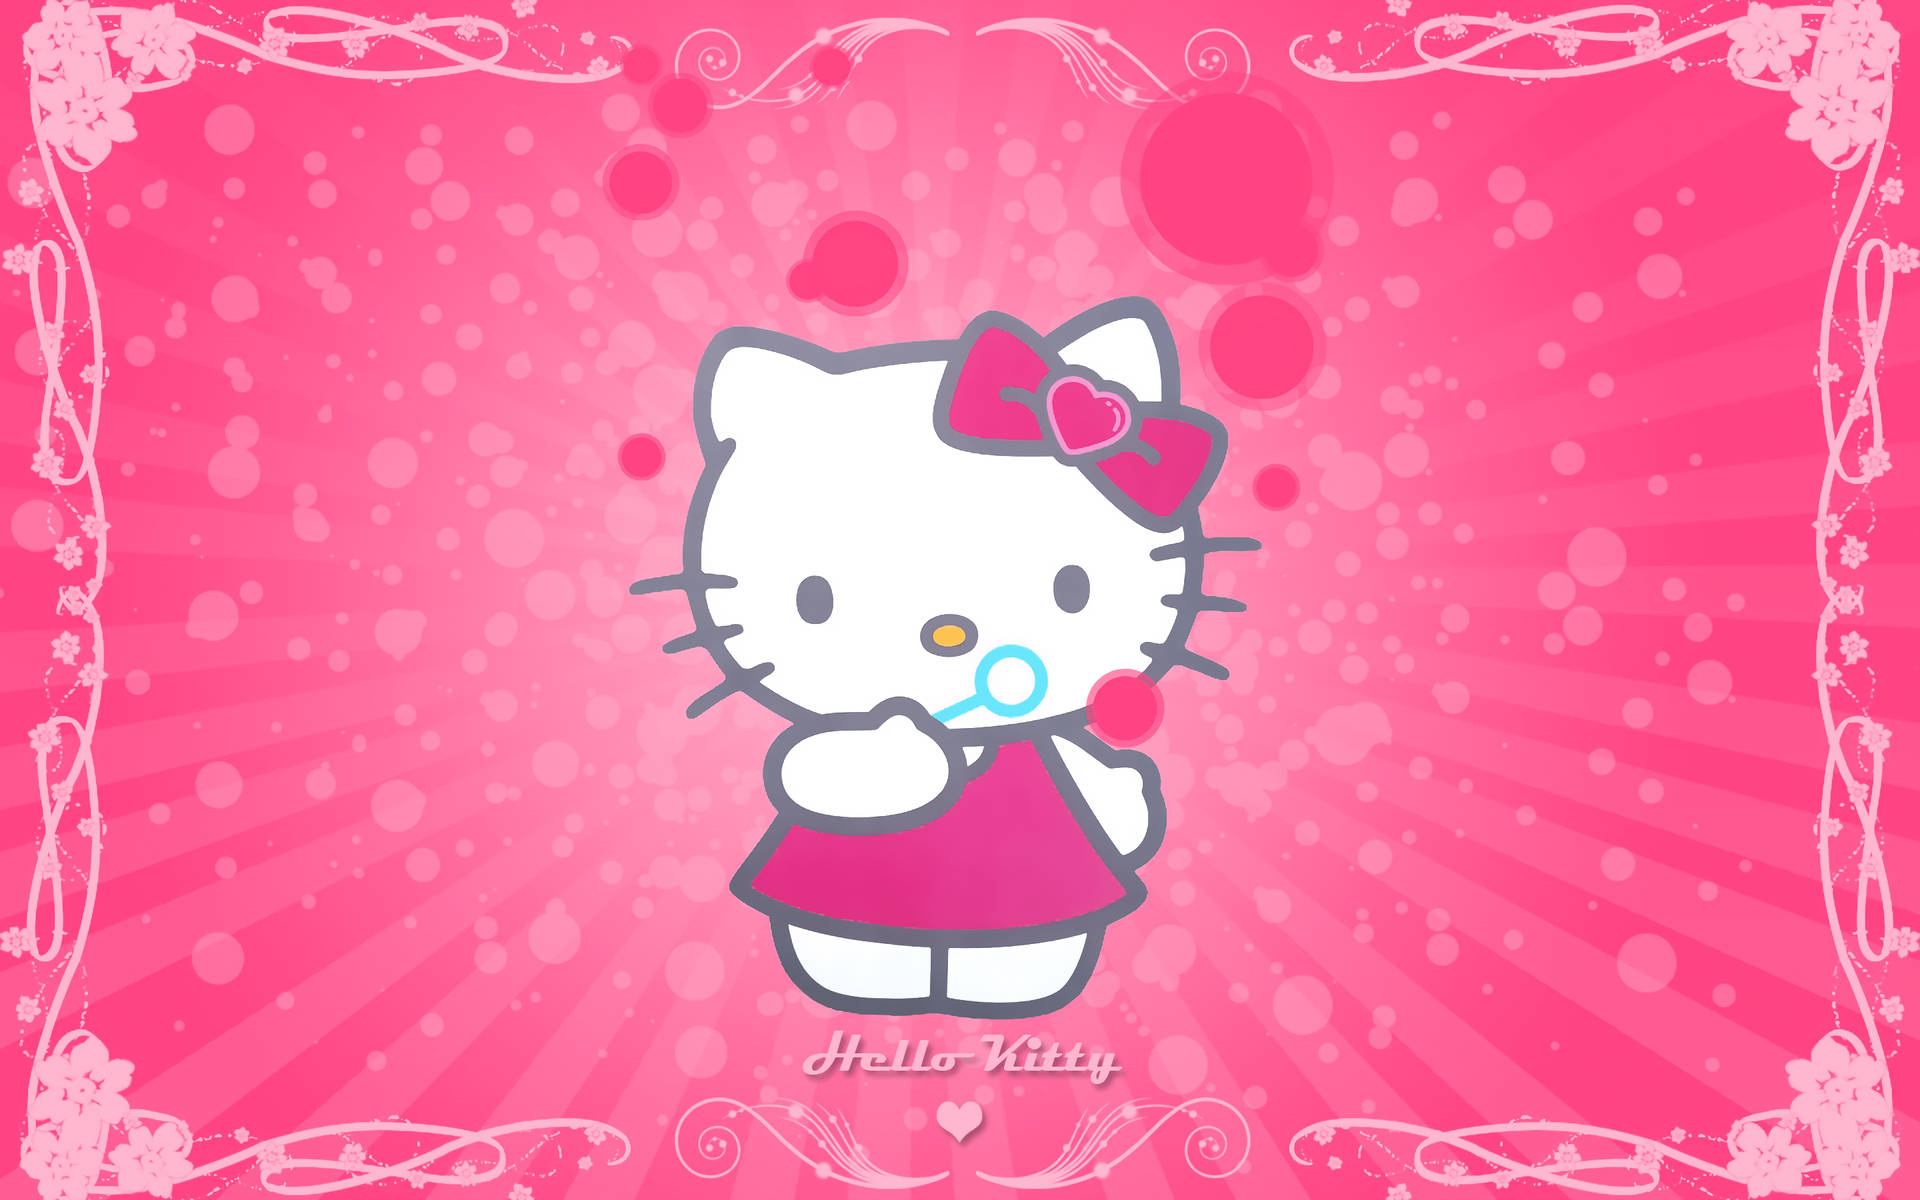 Hello Kitty Pink Bubbles Background